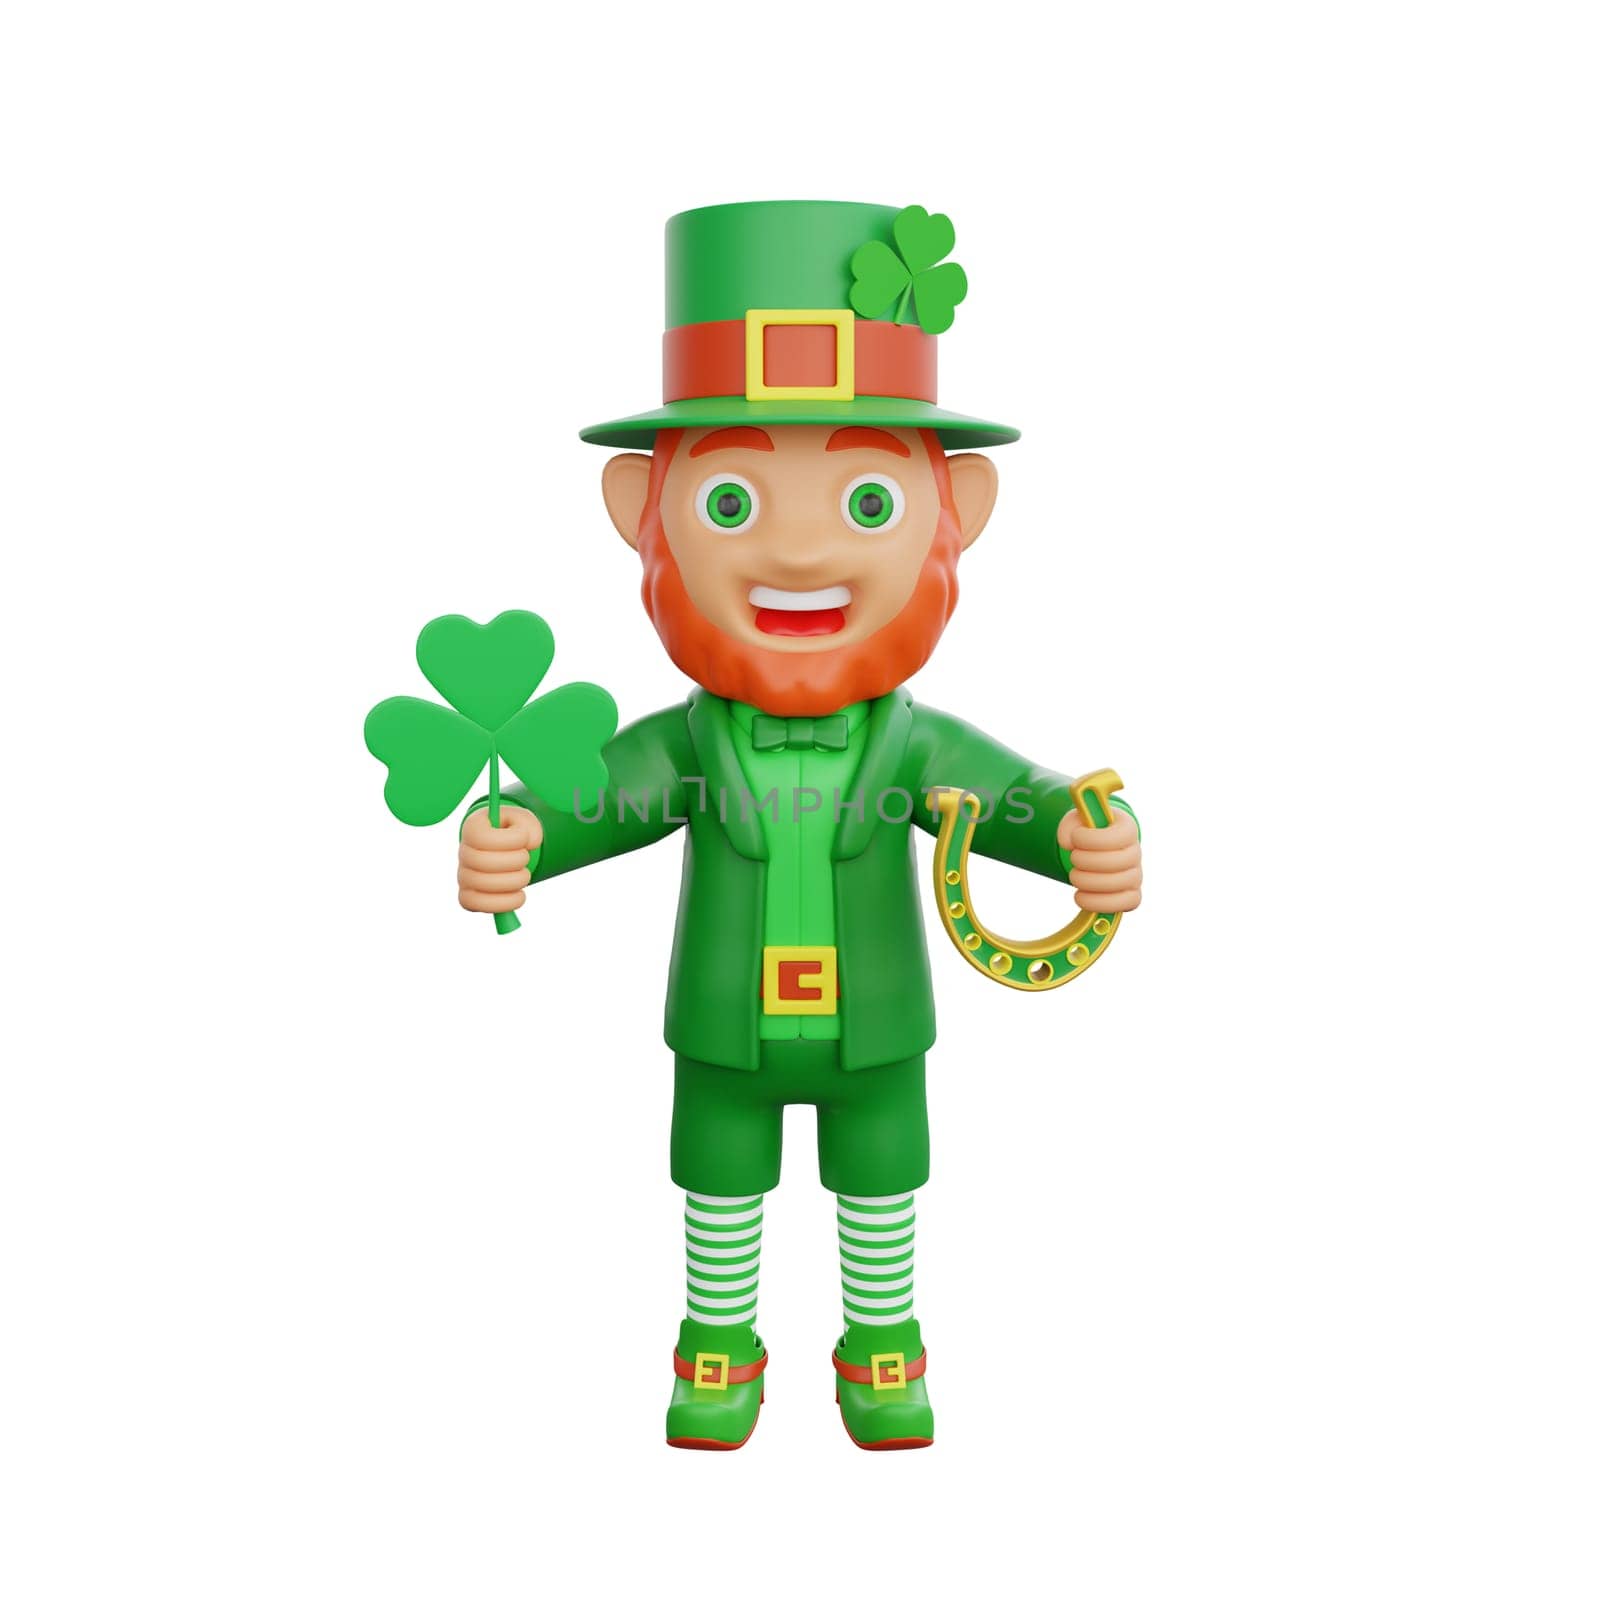 3D illustration of St. Patrick's Day character leprechaun holding a lucky clover and a golden horseshoe